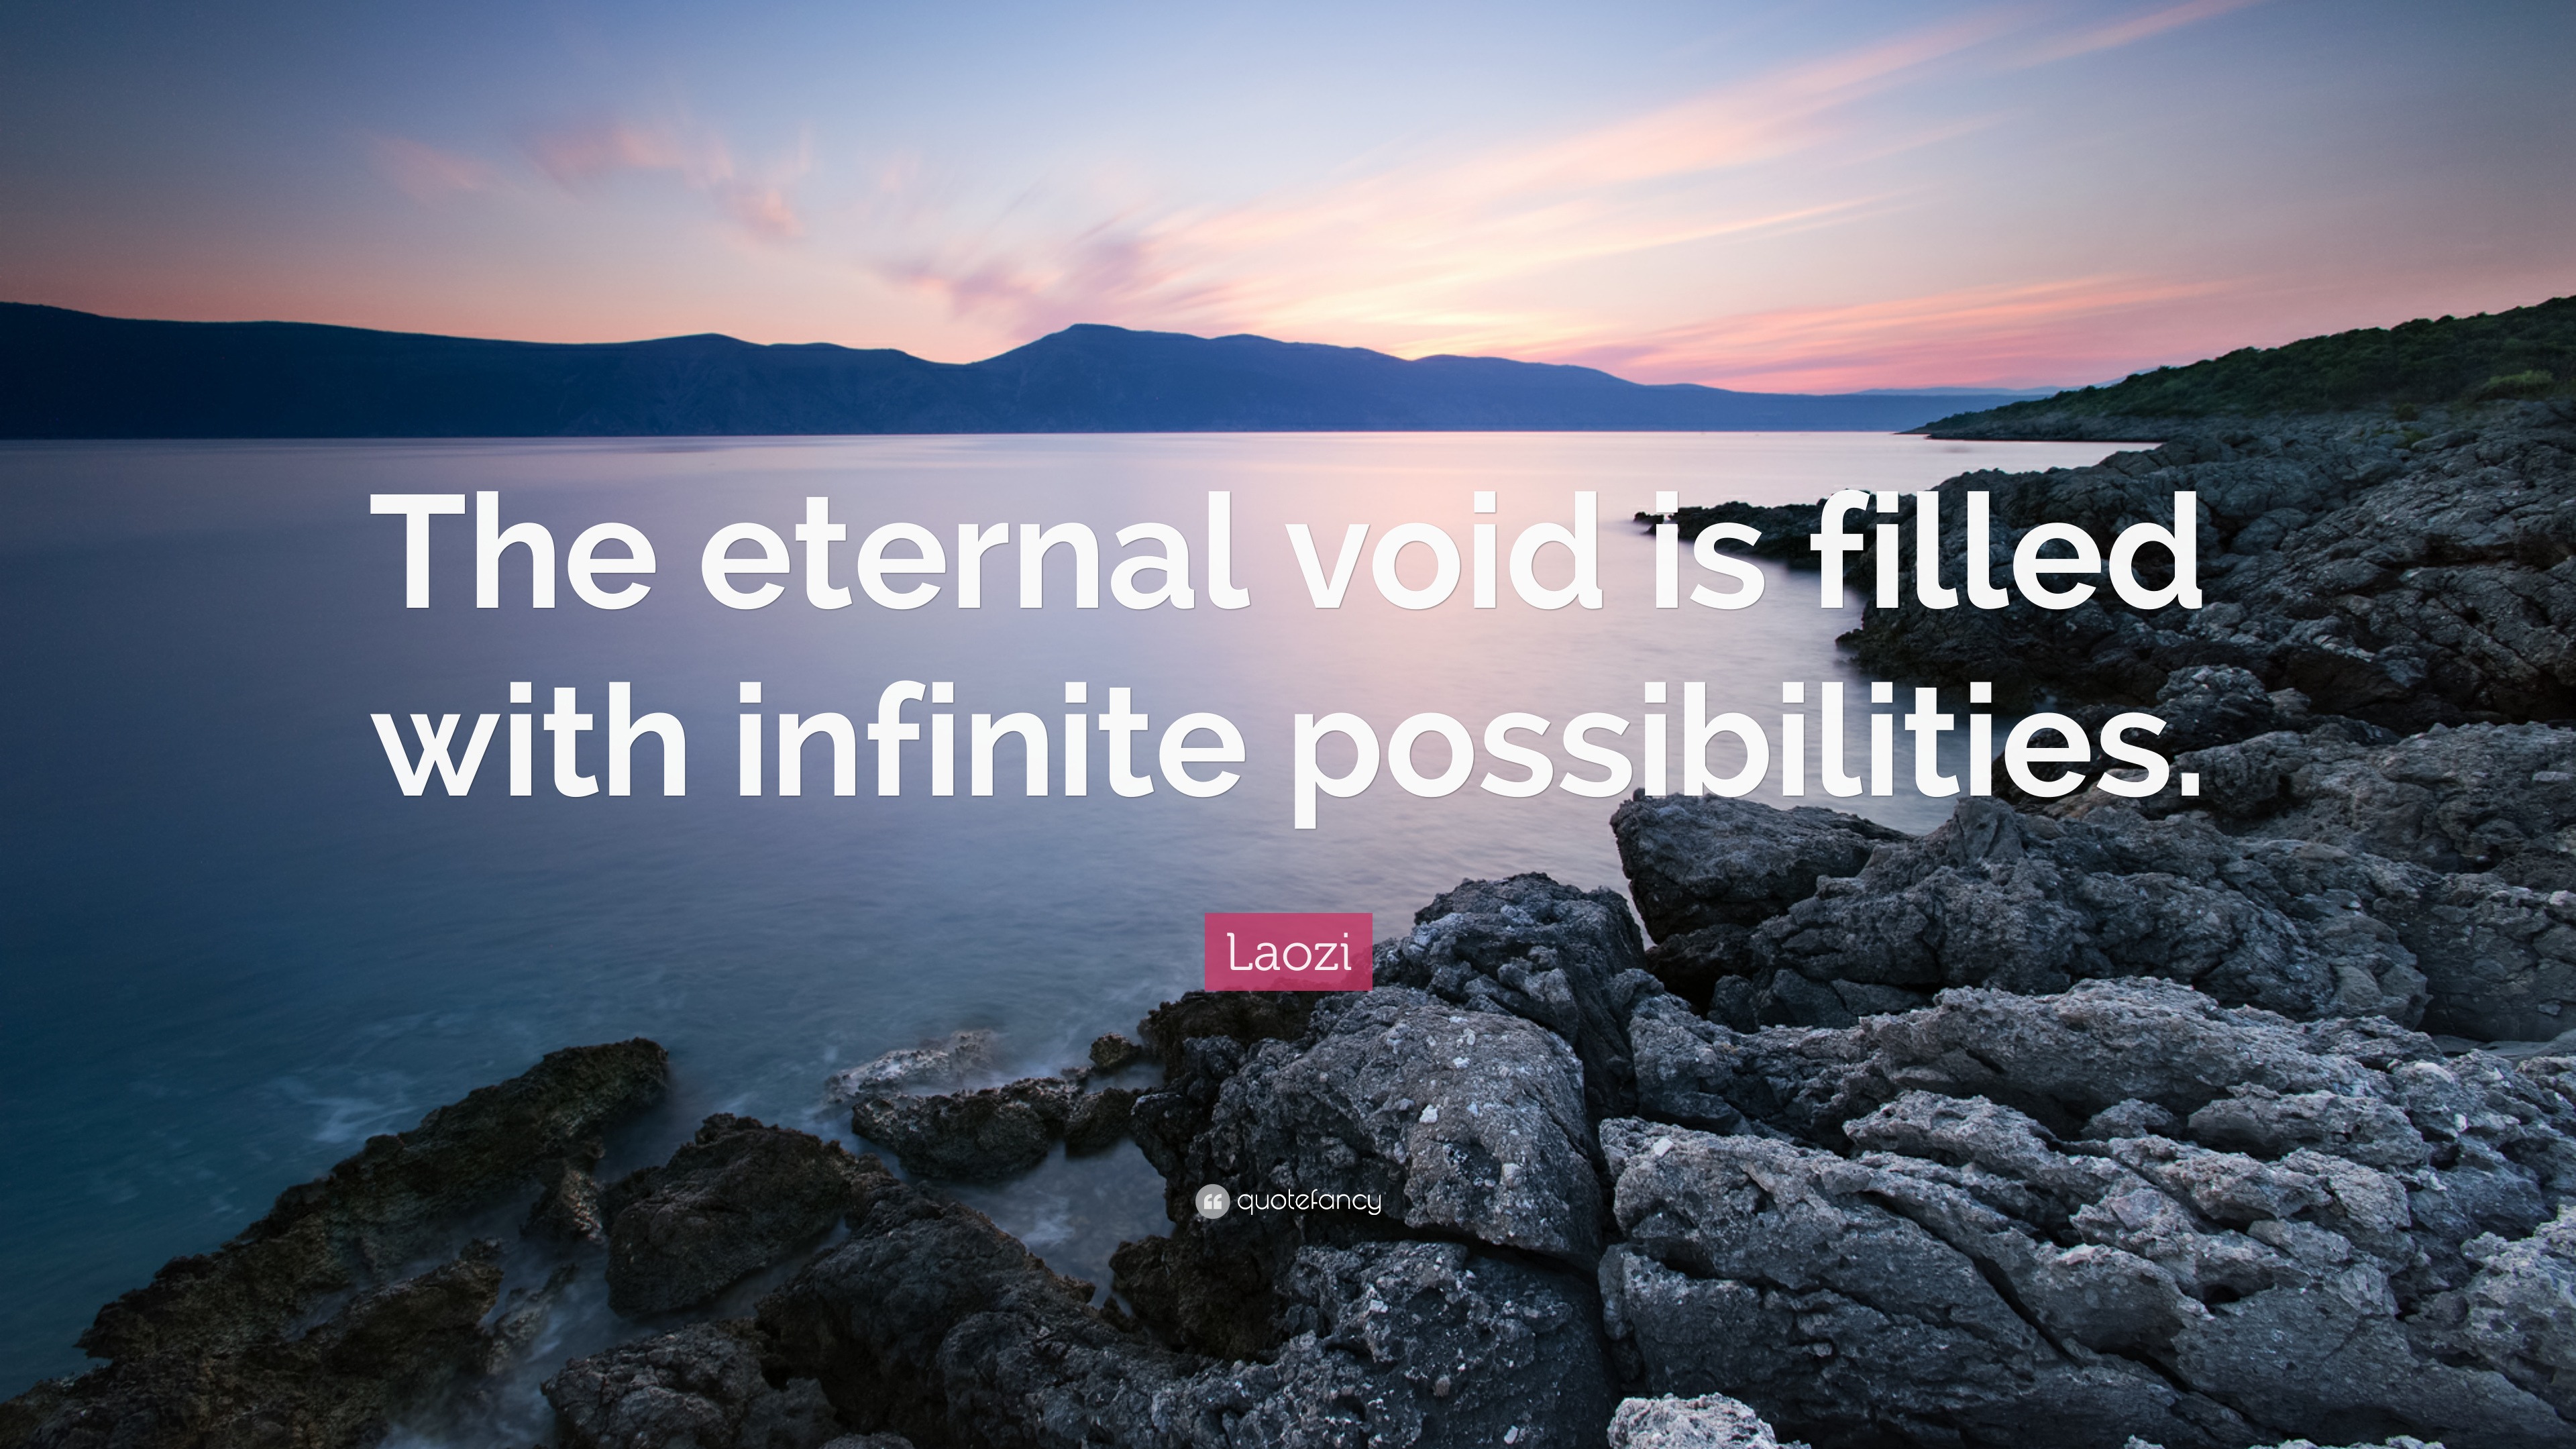 https://quotefancy.com/media/wallpaper/3840x2160/4786178-Laozi-Quote-The-eternal-void-is-filled-with-infinite-possibilities.jpg